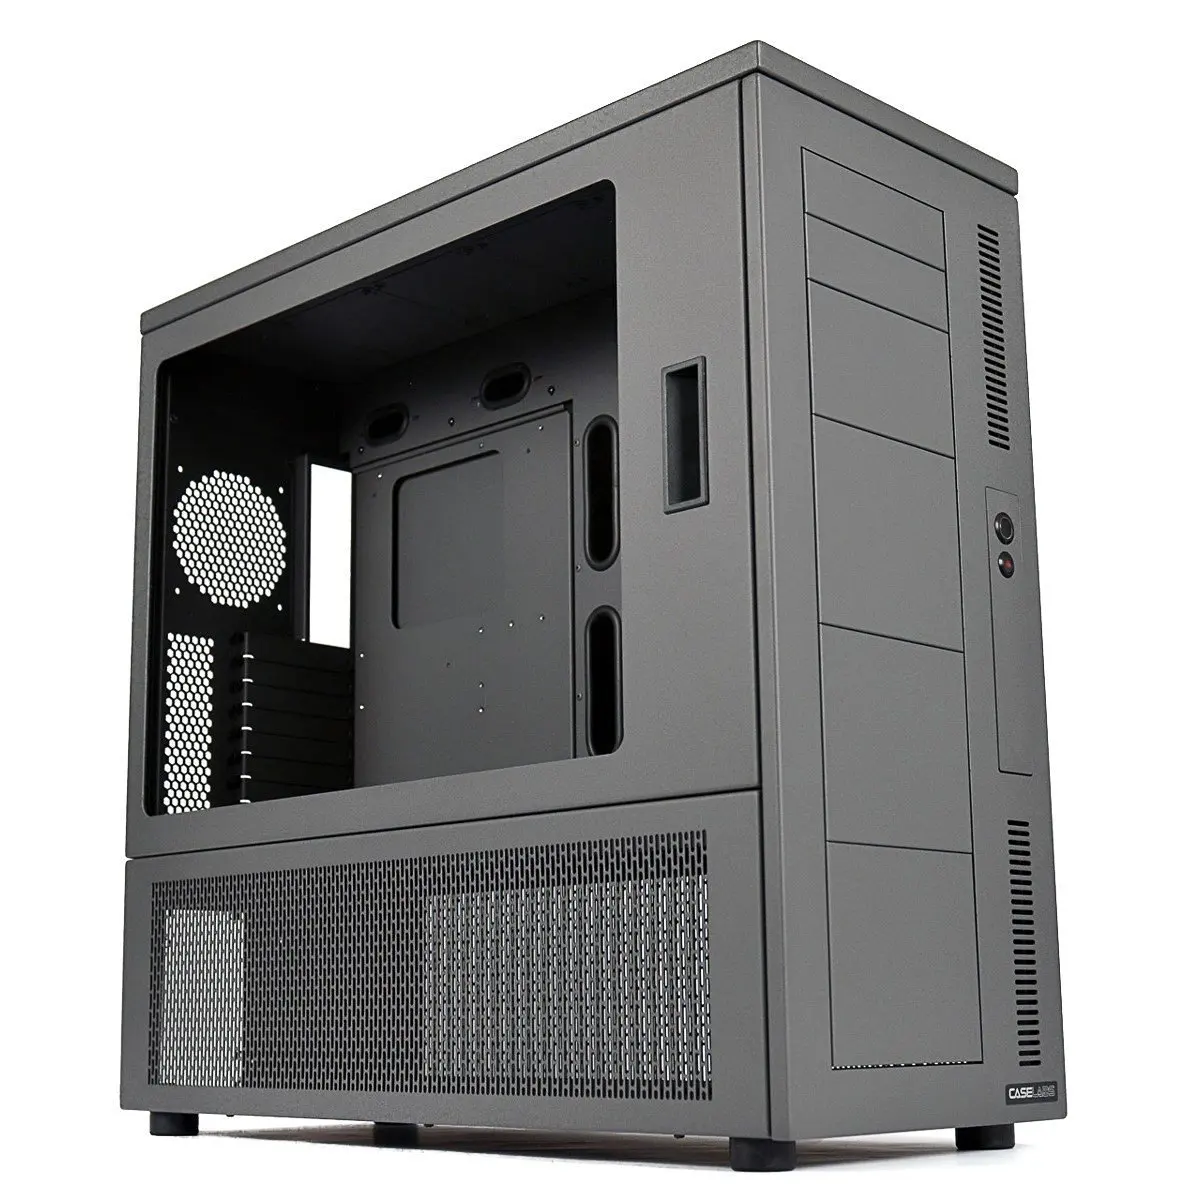 Buy Caselabs Magnum Sma8 Case Quick Ship Model With Ventilated Bay Covers Flex Bay Configuration Gunmetal In Cheap Price On Alibaba Com